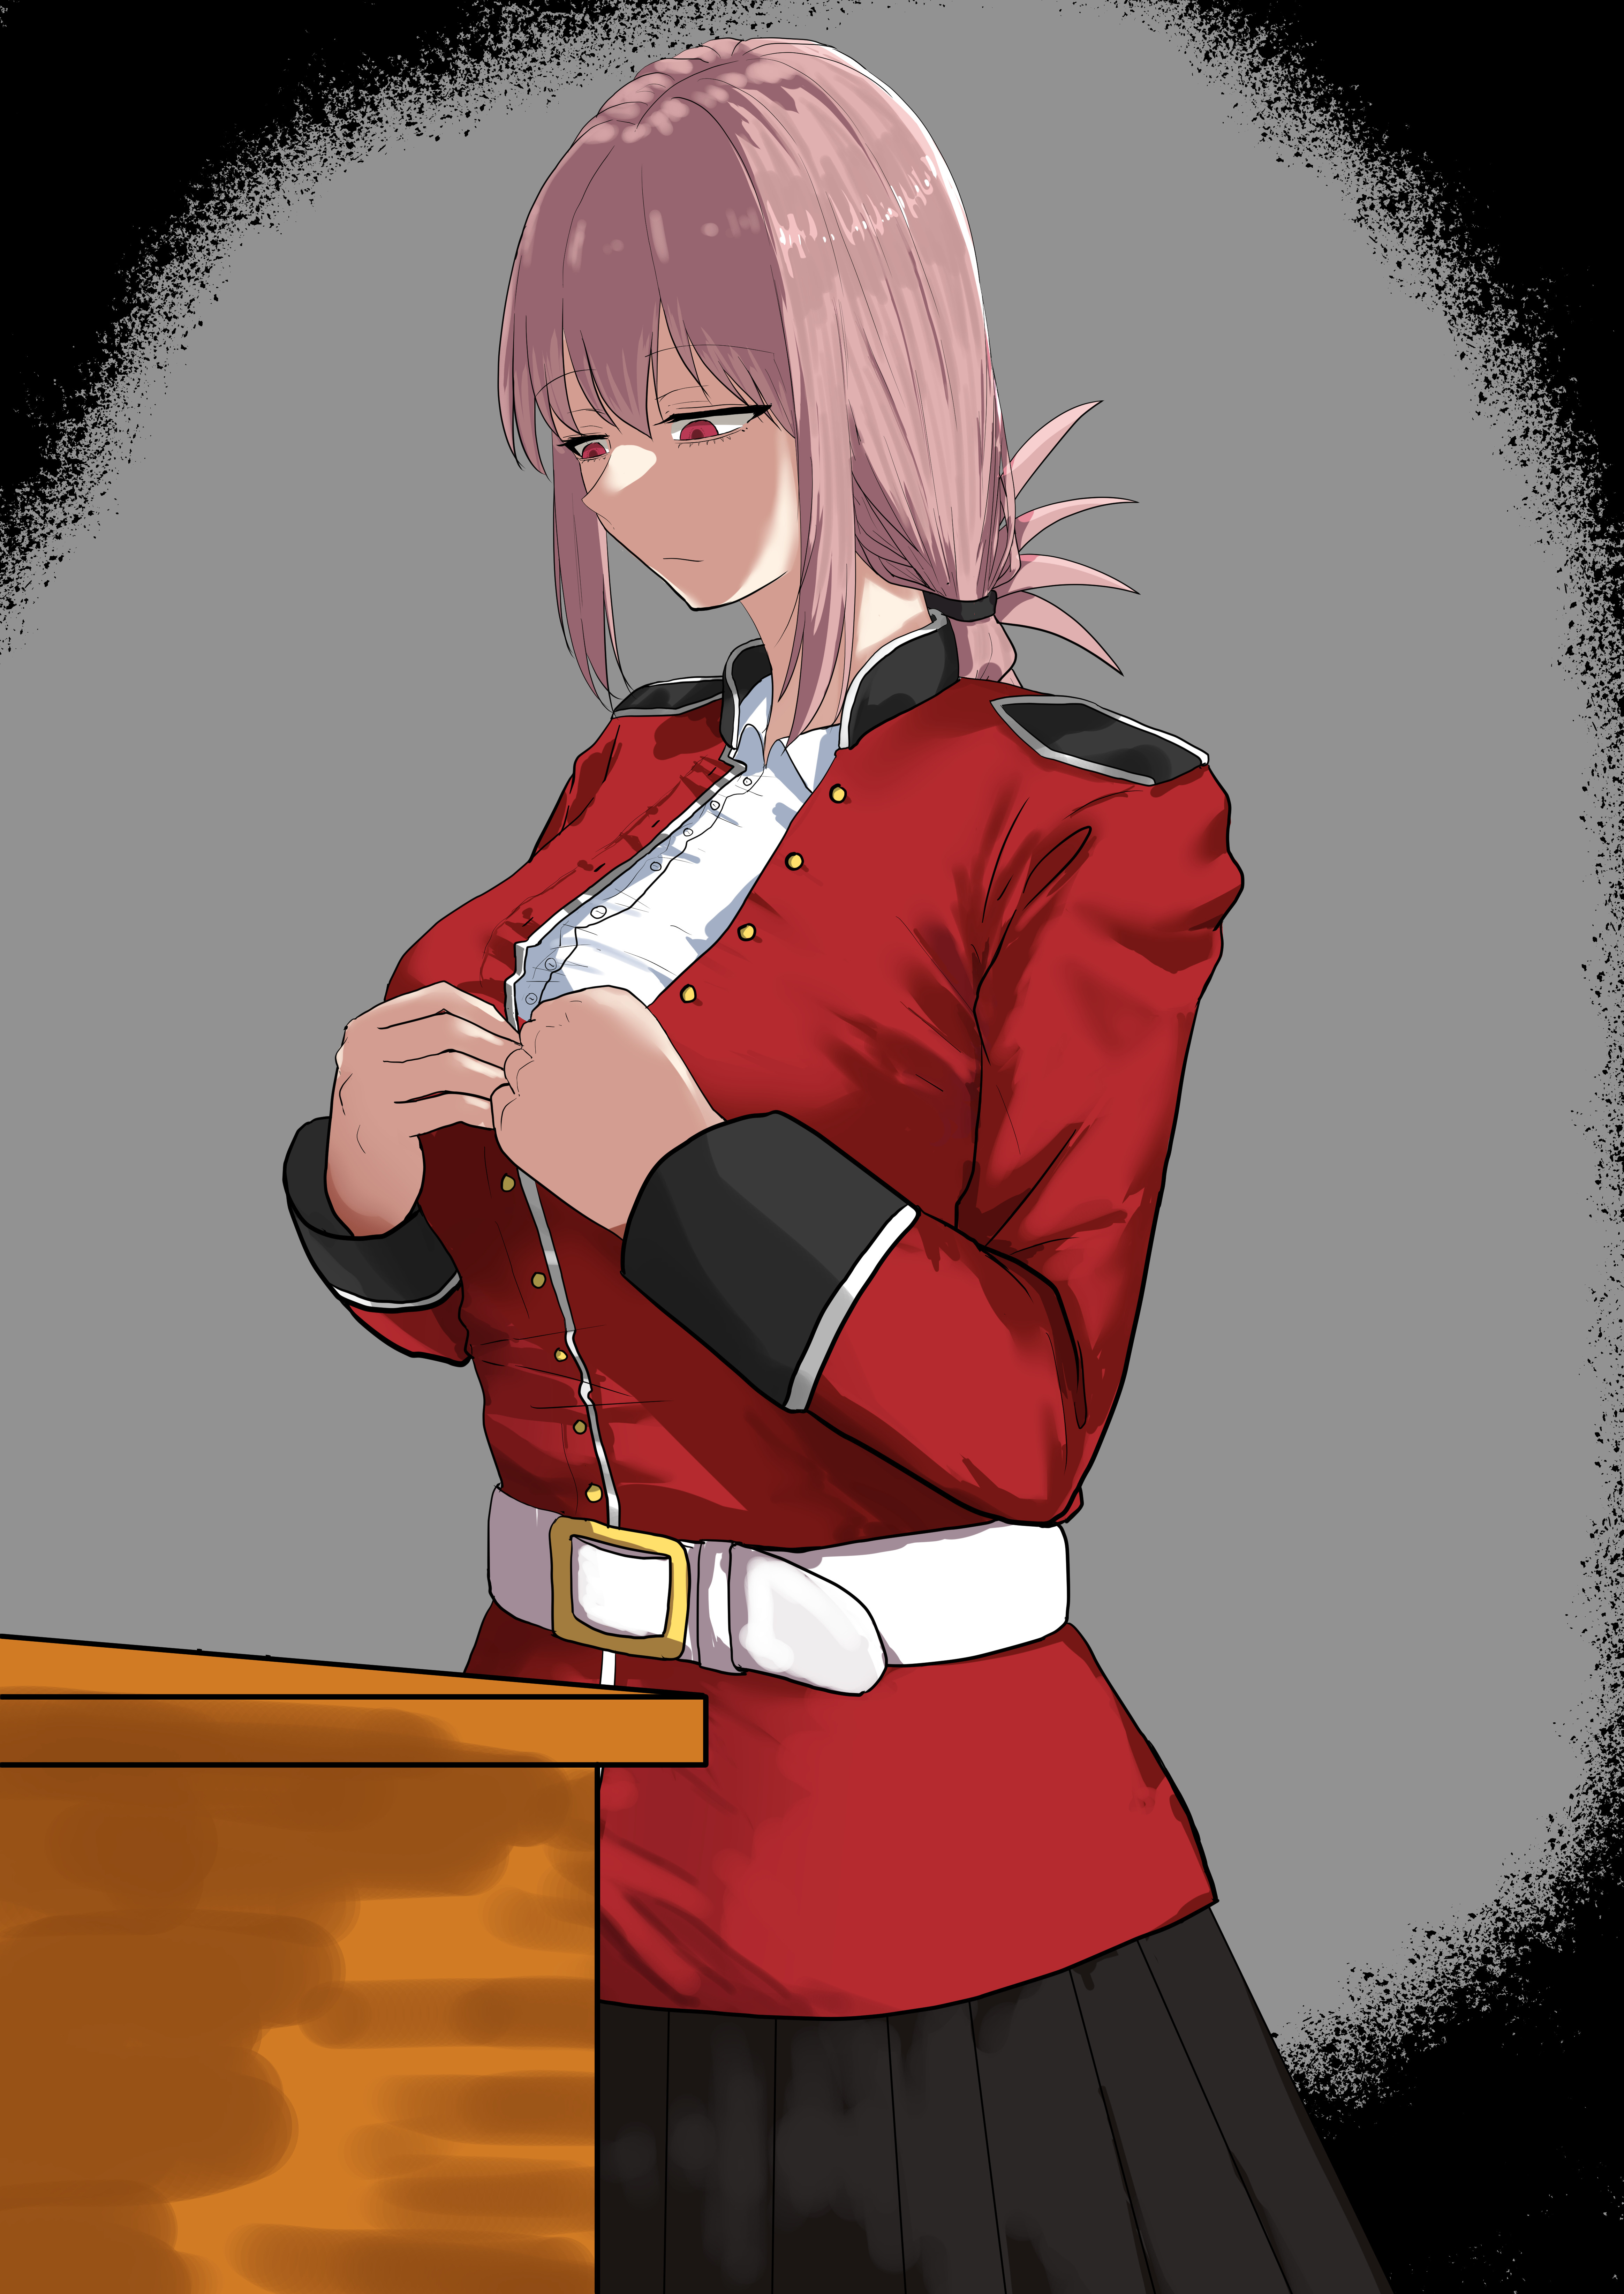 Anime Anime Girls Fate Series Fate Grand Order Florence Nightingale Fate Grand Order Long Hair Blond 4657x6577